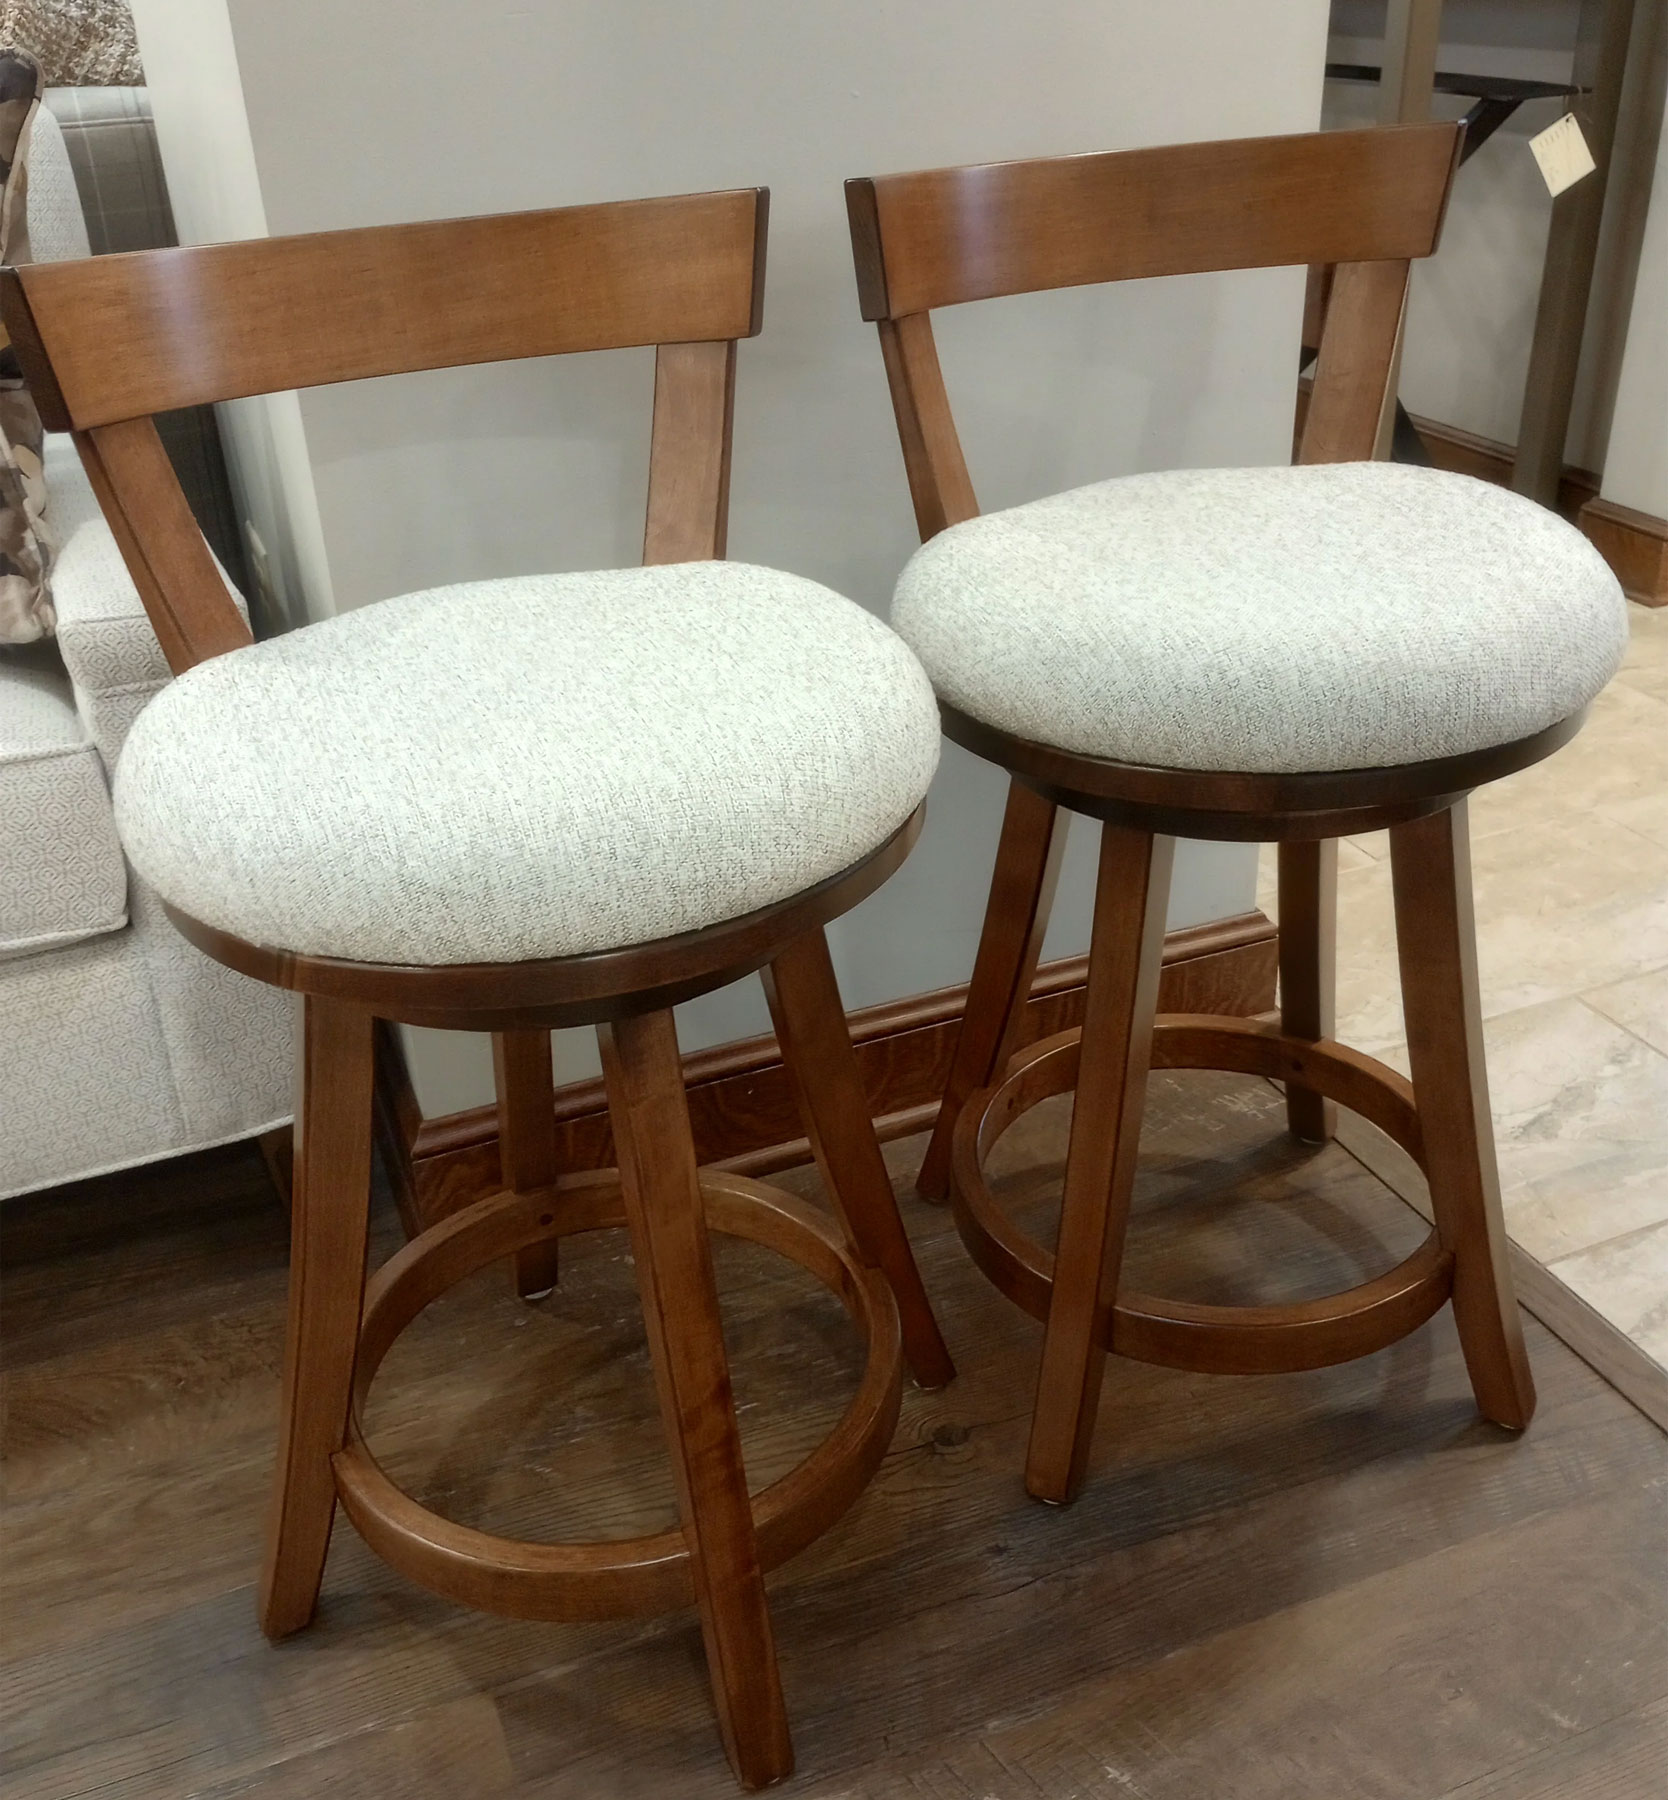 (2) Turnstone Swivel Stools with Back in Brown Maple